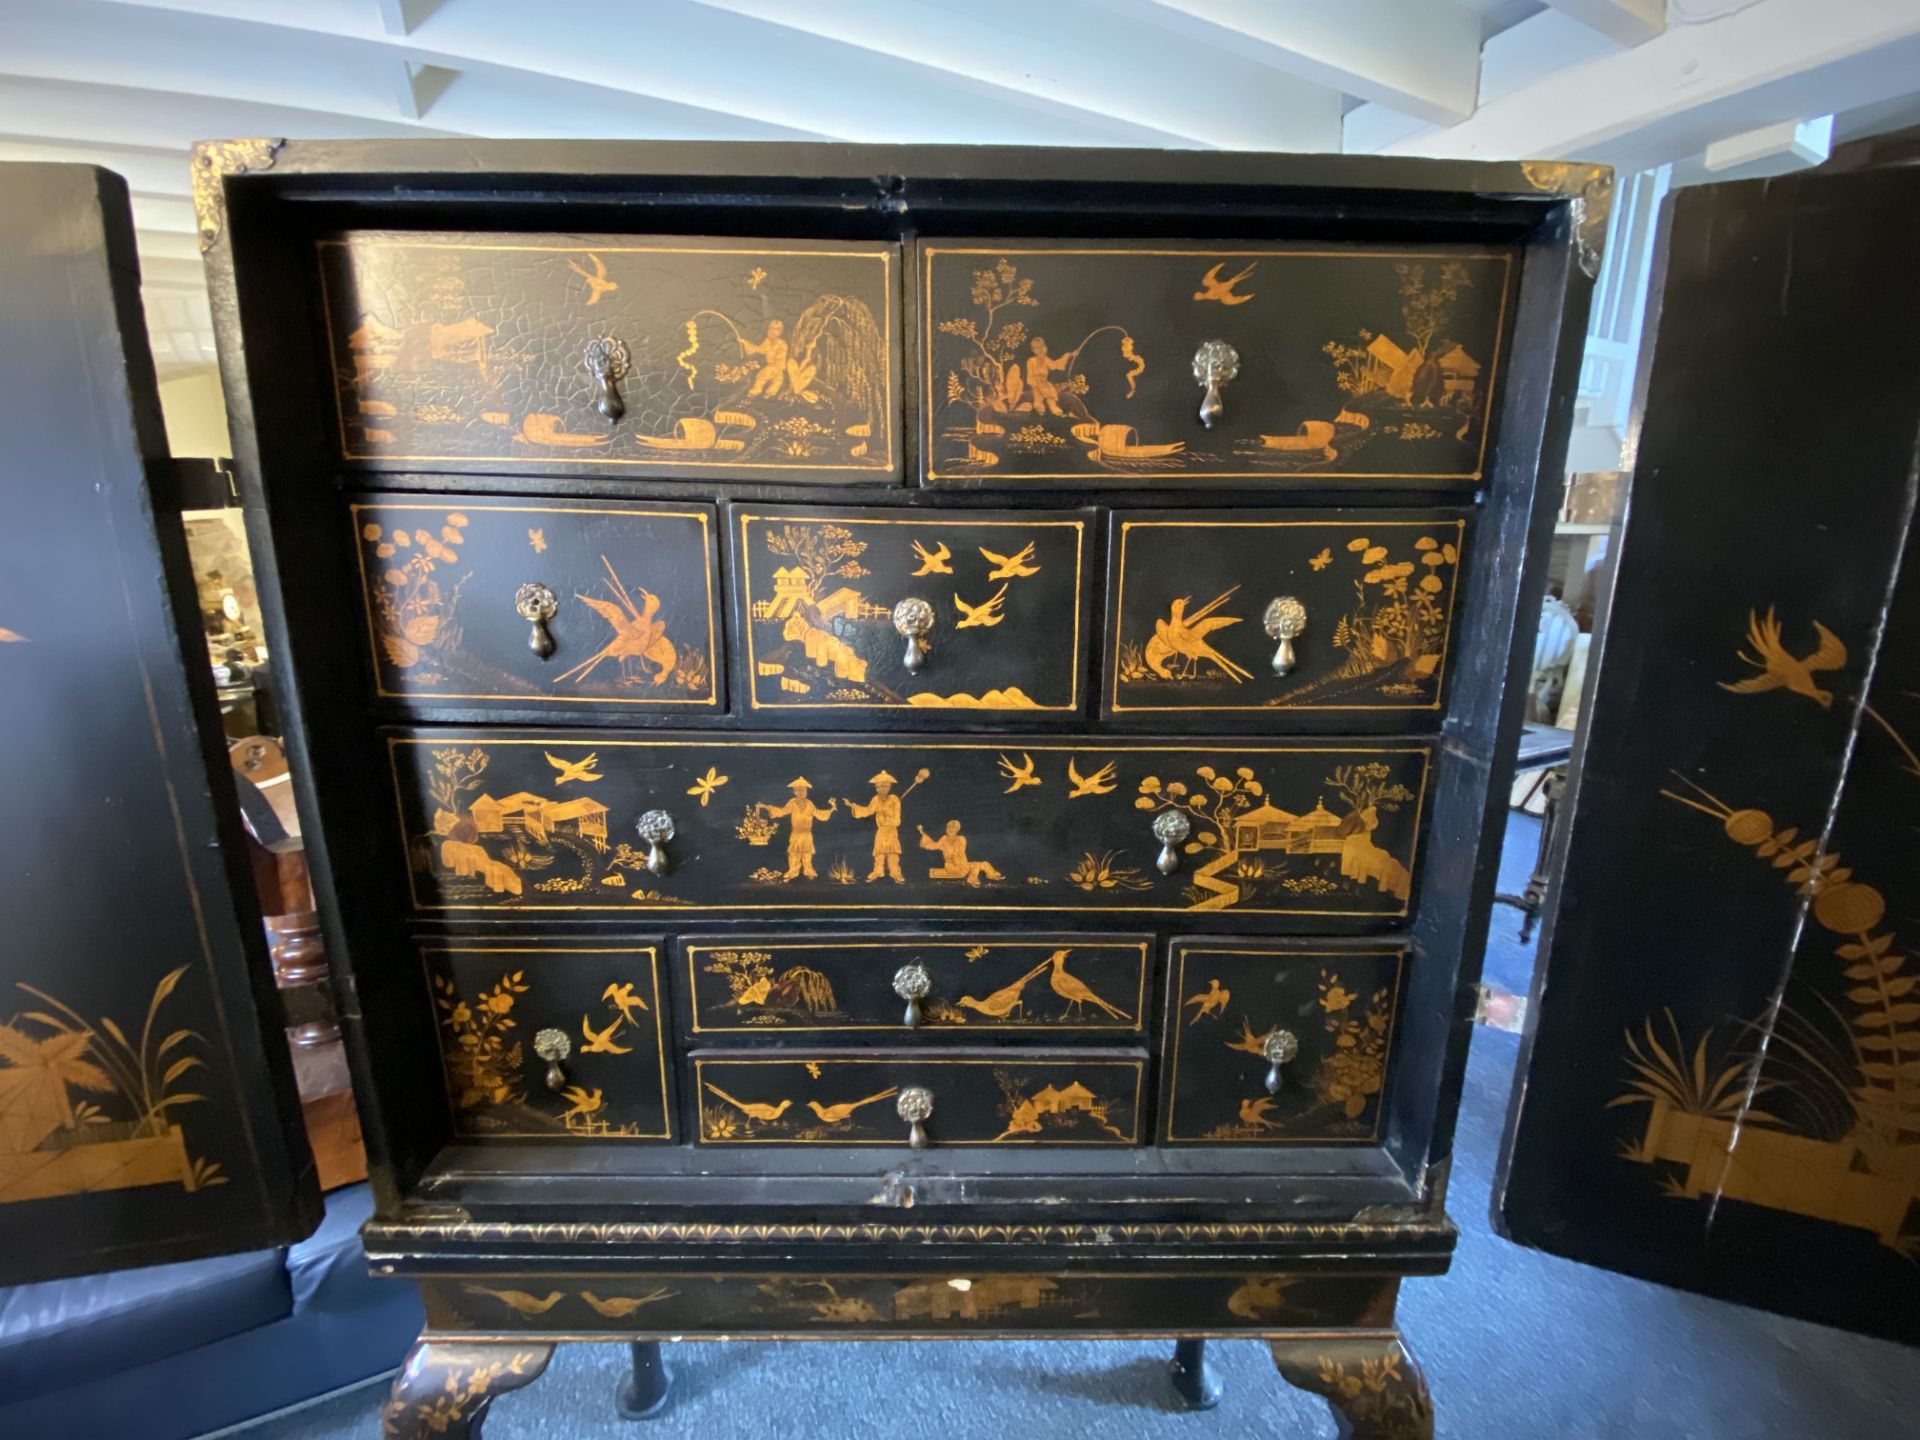 An early 18th century Chinese export black lacquer cabinet on a European stand - Image 11 of 36